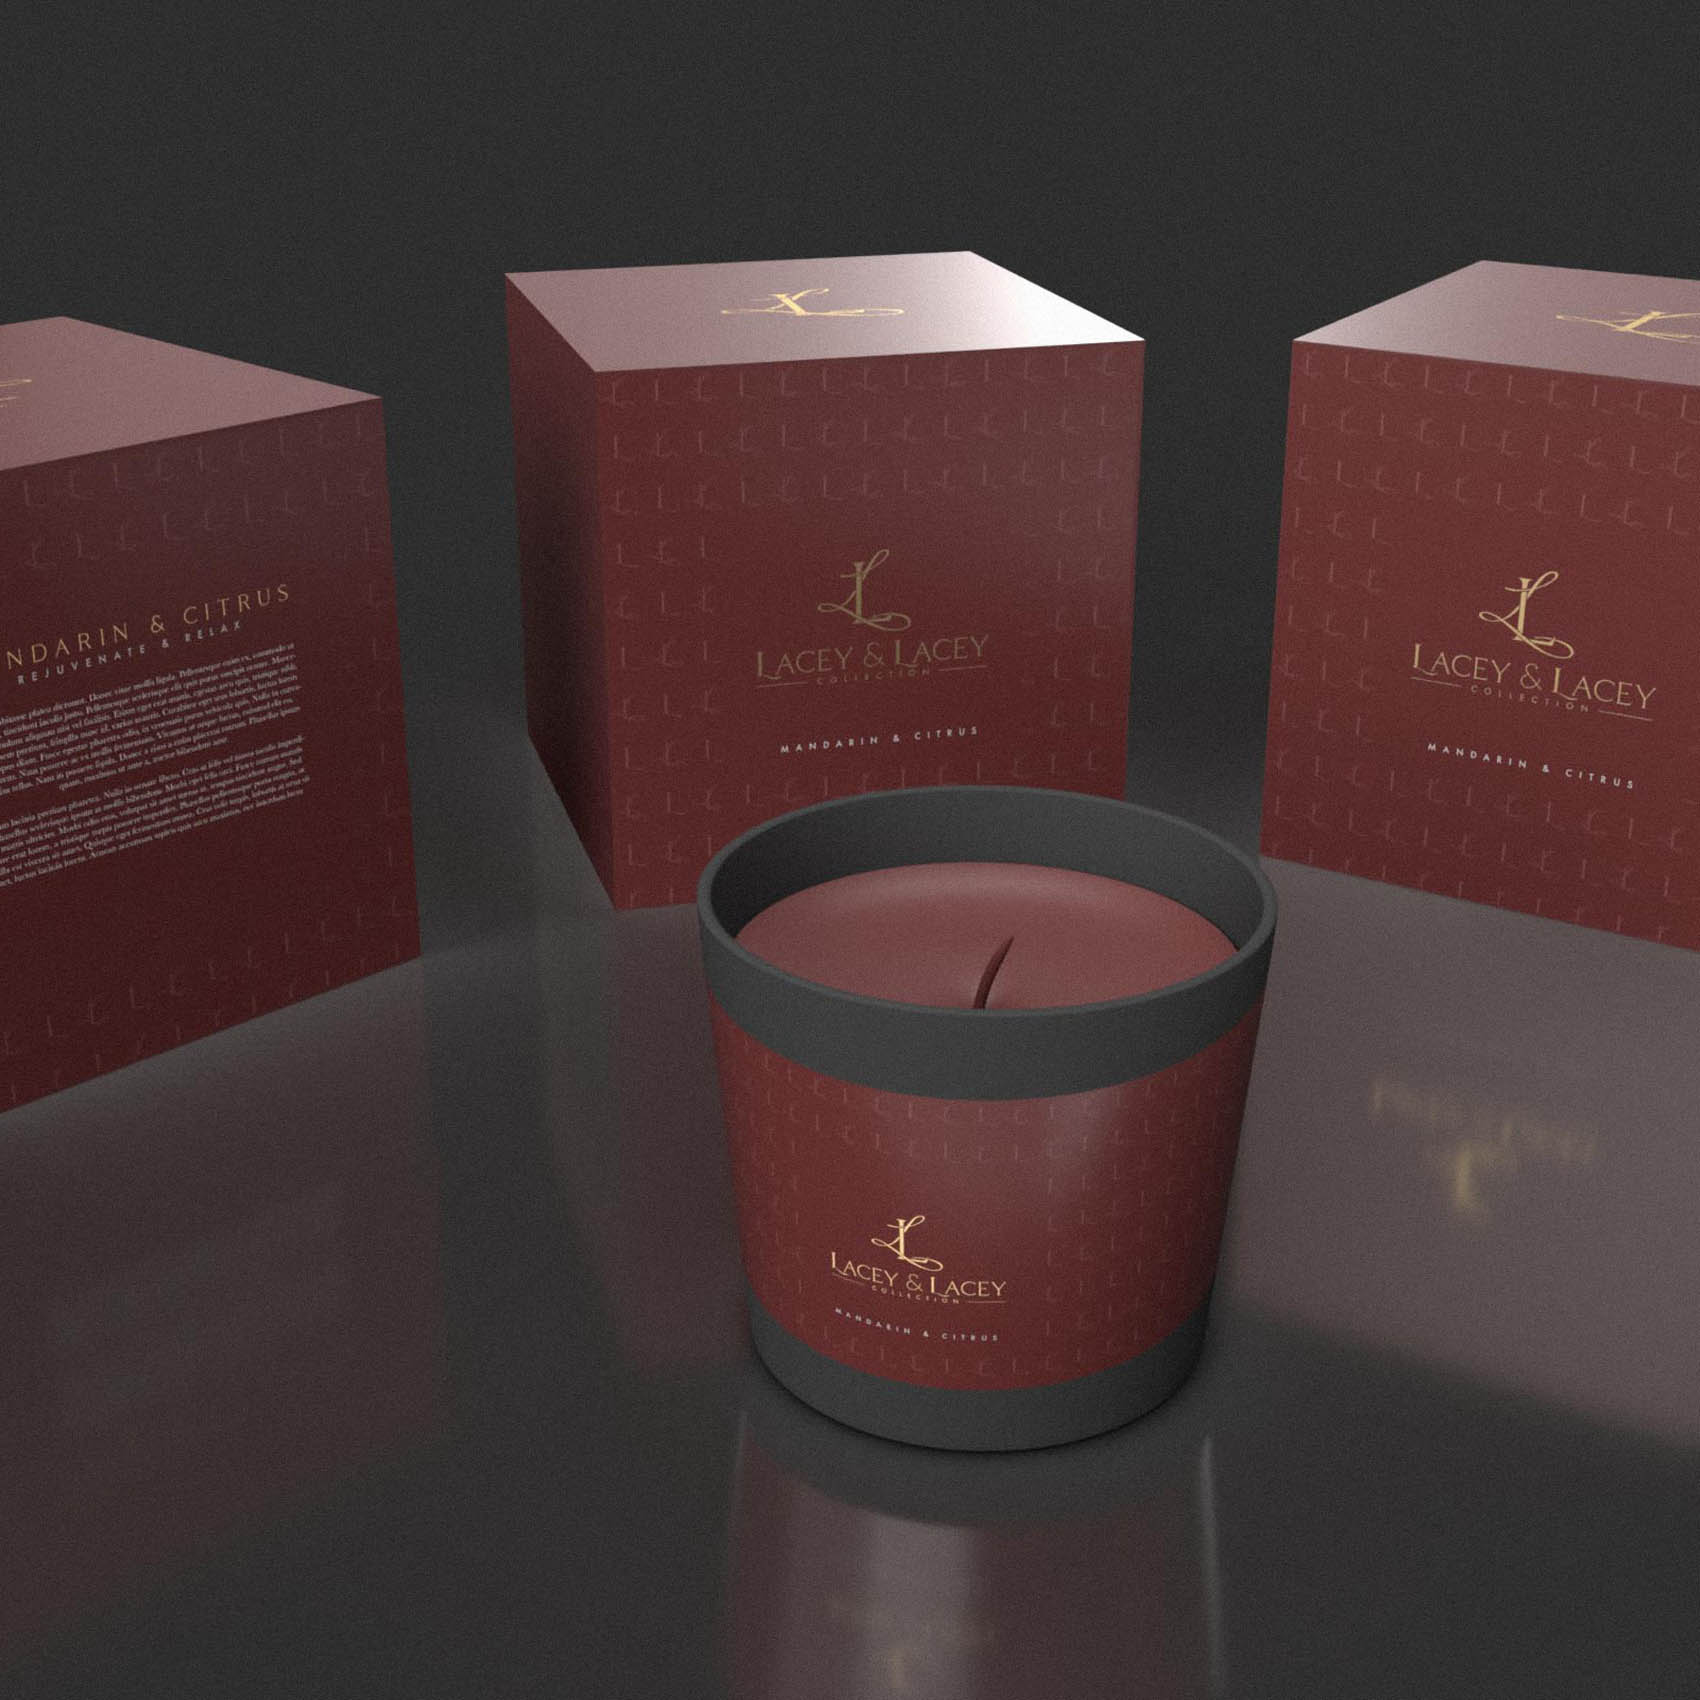 Lacey & Lacey Luxury Candle Packaging Design